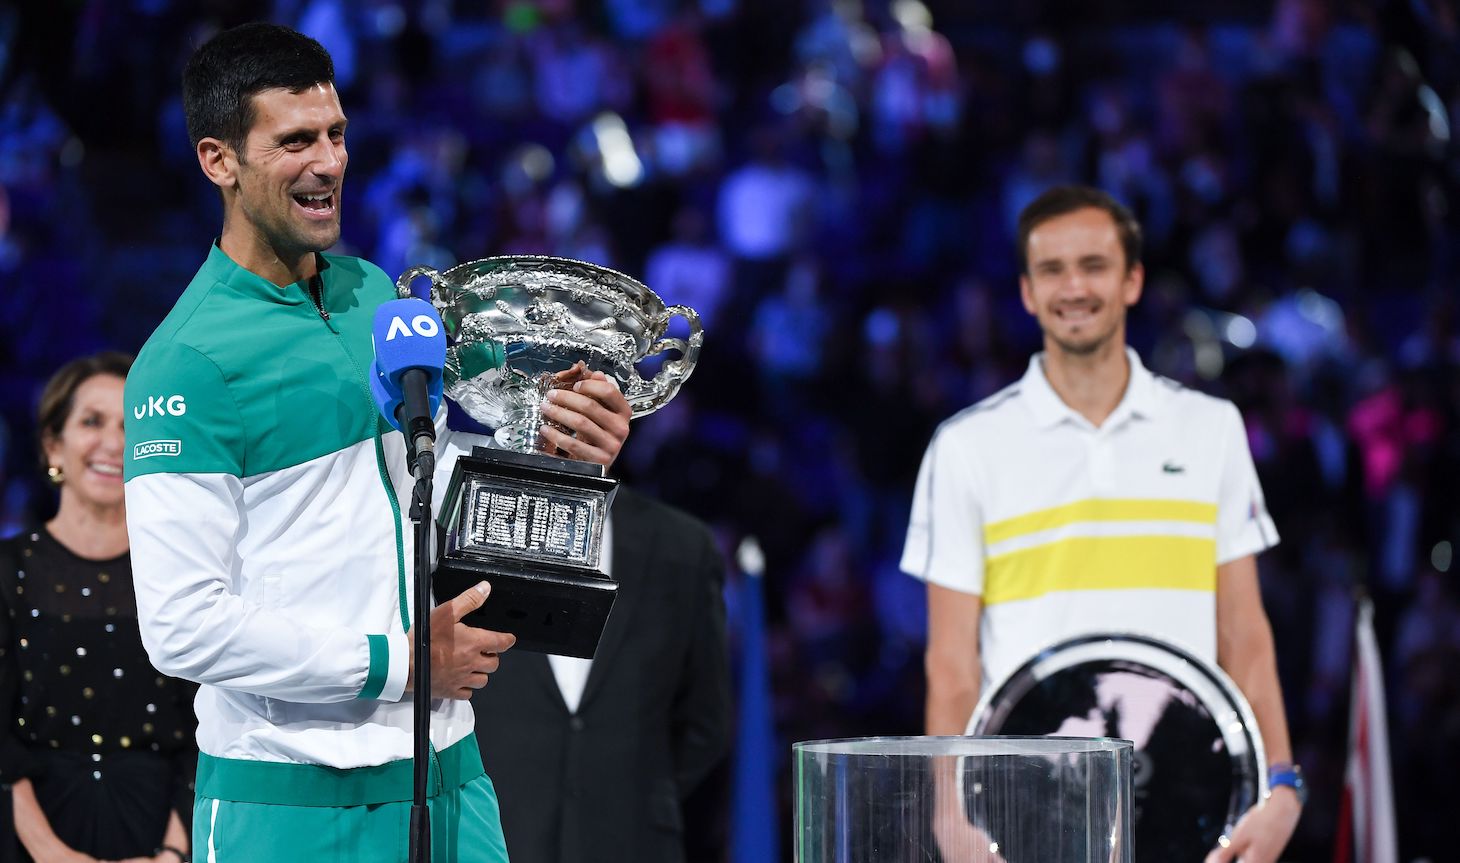 Serbia's Novak Djokovic speaks holding the Norman Brookes Challenge Cup trophy following his victory against Russia's Daniil Medvedev in their men's singles final match on day fourteen of the Australian Open tennis tournament in Melbourne on February 21, 2021. (Photo by William WEST / AFP) / -- IMAGE RESTRICTED TO EDITORIAL USE - STRICTLY NO COMMERCIAL USE -- (Photo by WILLIAM WEST/AFP via Getty Images)